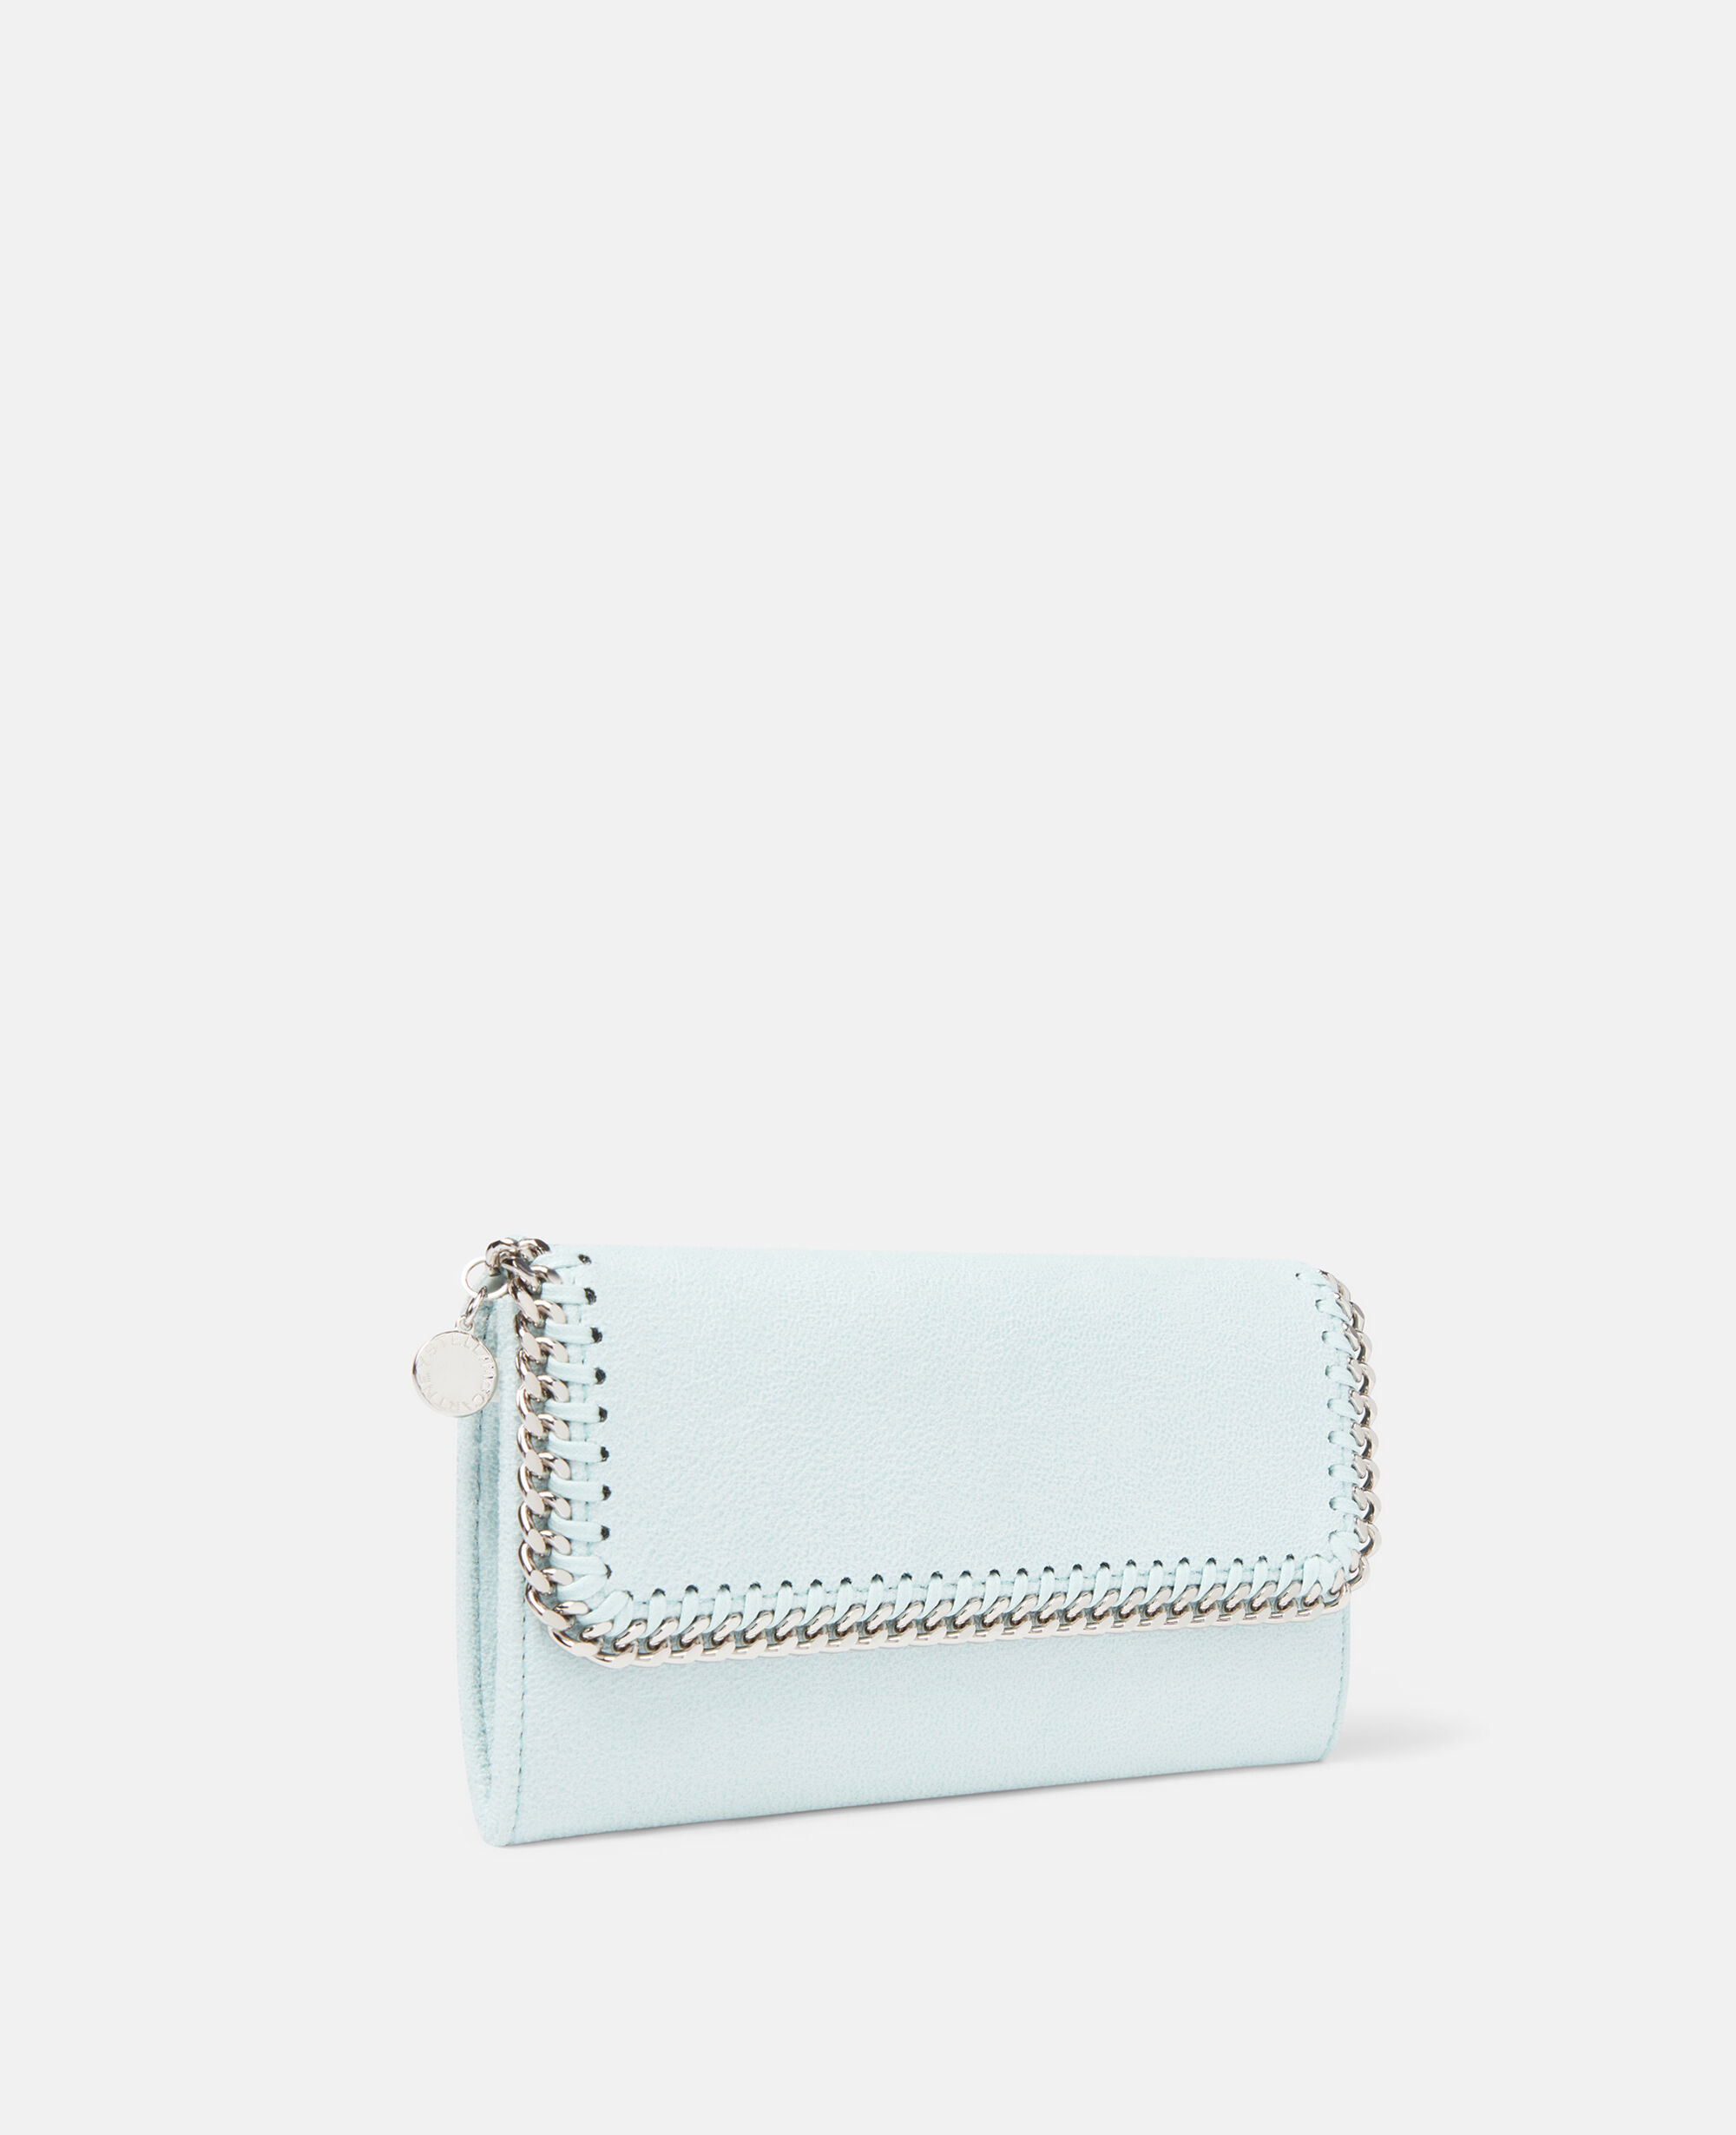 Acceccories for Women | Stella Mccartney US